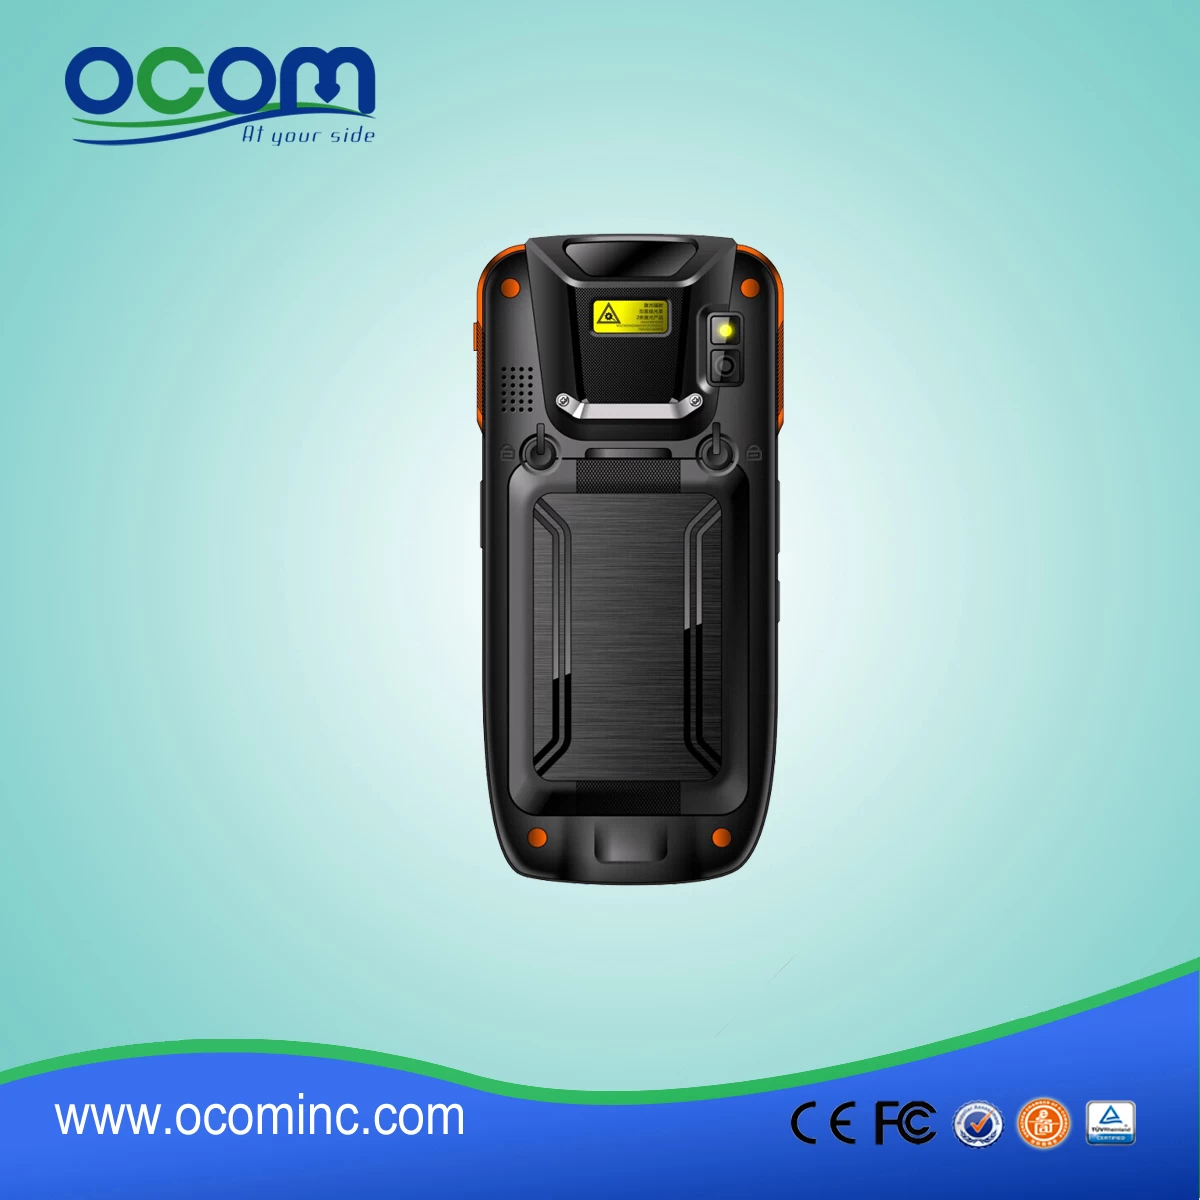 China hot supplier industrial pda android, rugged pda device